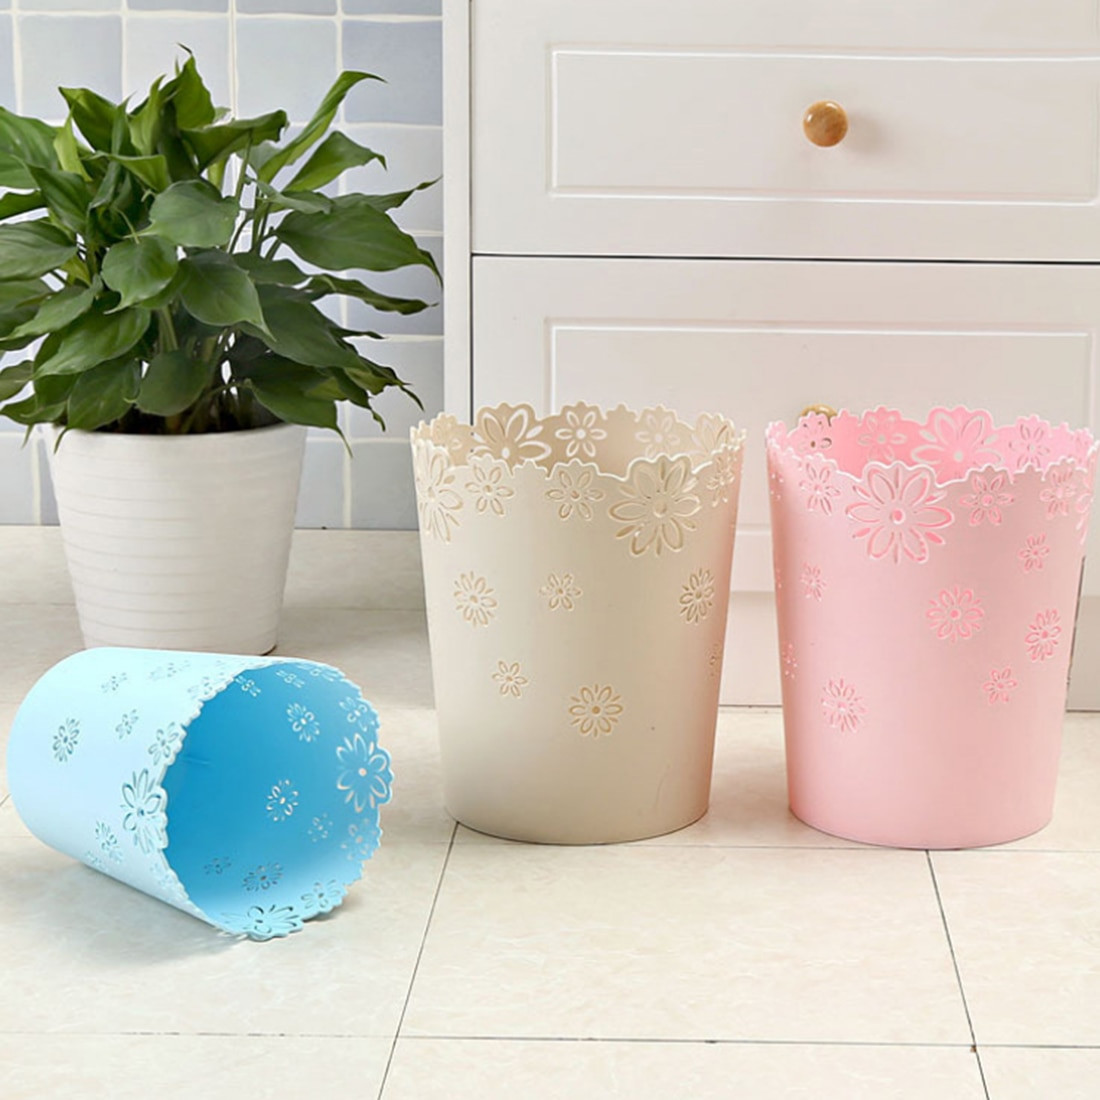 13 Best Lily Shaped Vase 2022 free download lily shaped vase of hipsteen trash can hollow lily shape plastic lidless home wastepaper regarding hipsteen trash can hollow lily shape plastic lidless home wastepaper baskets kitchen bathro